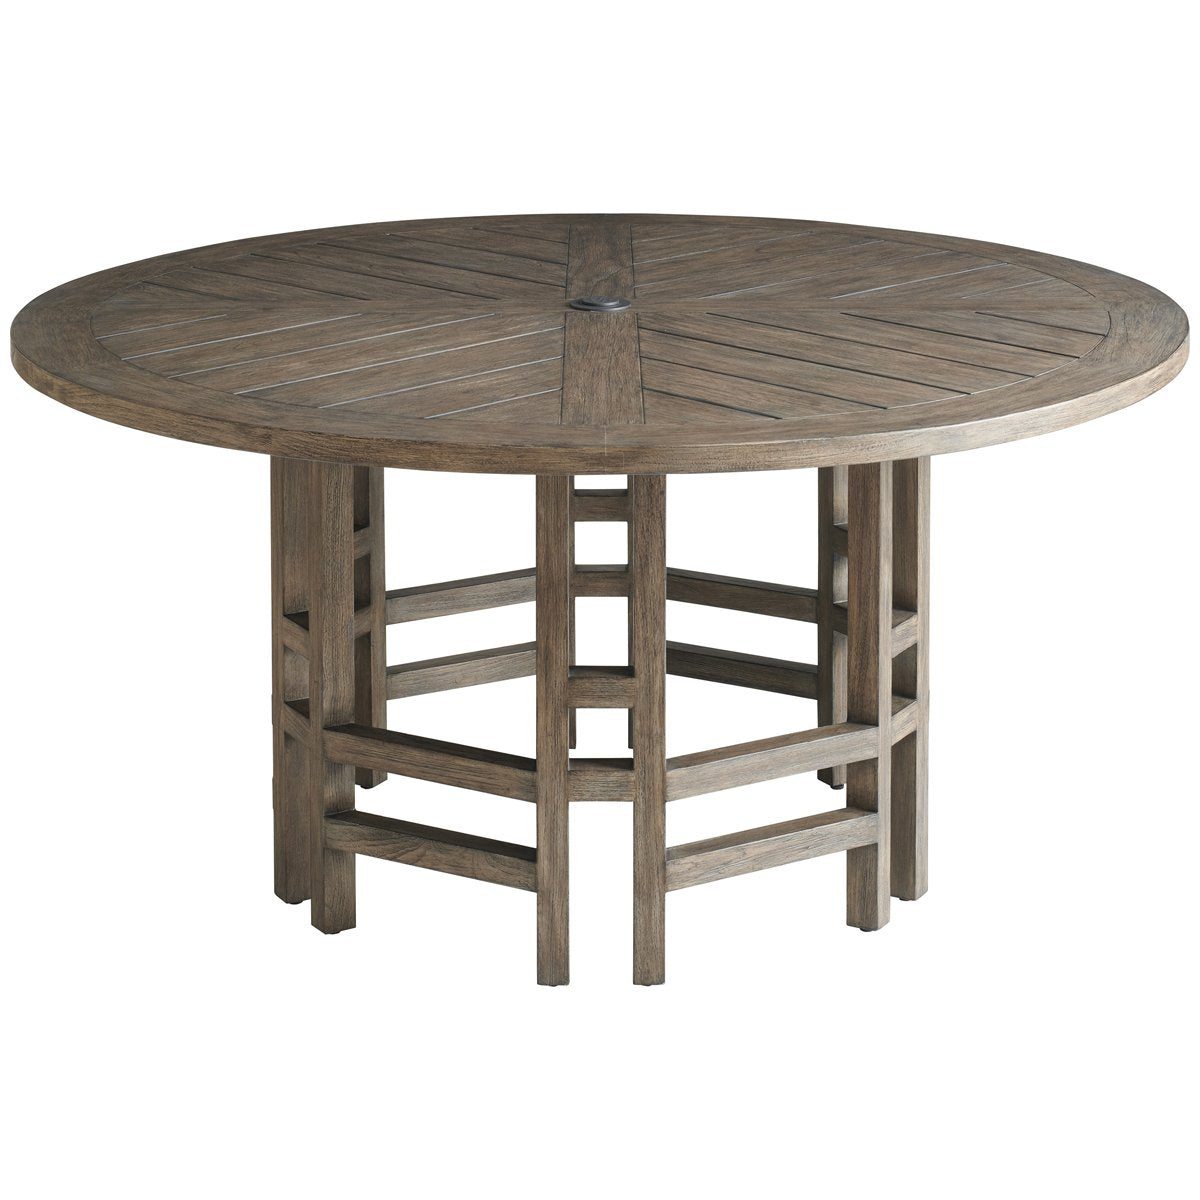 Tommy Bahama La Jolla Round Outdoor Dining Table